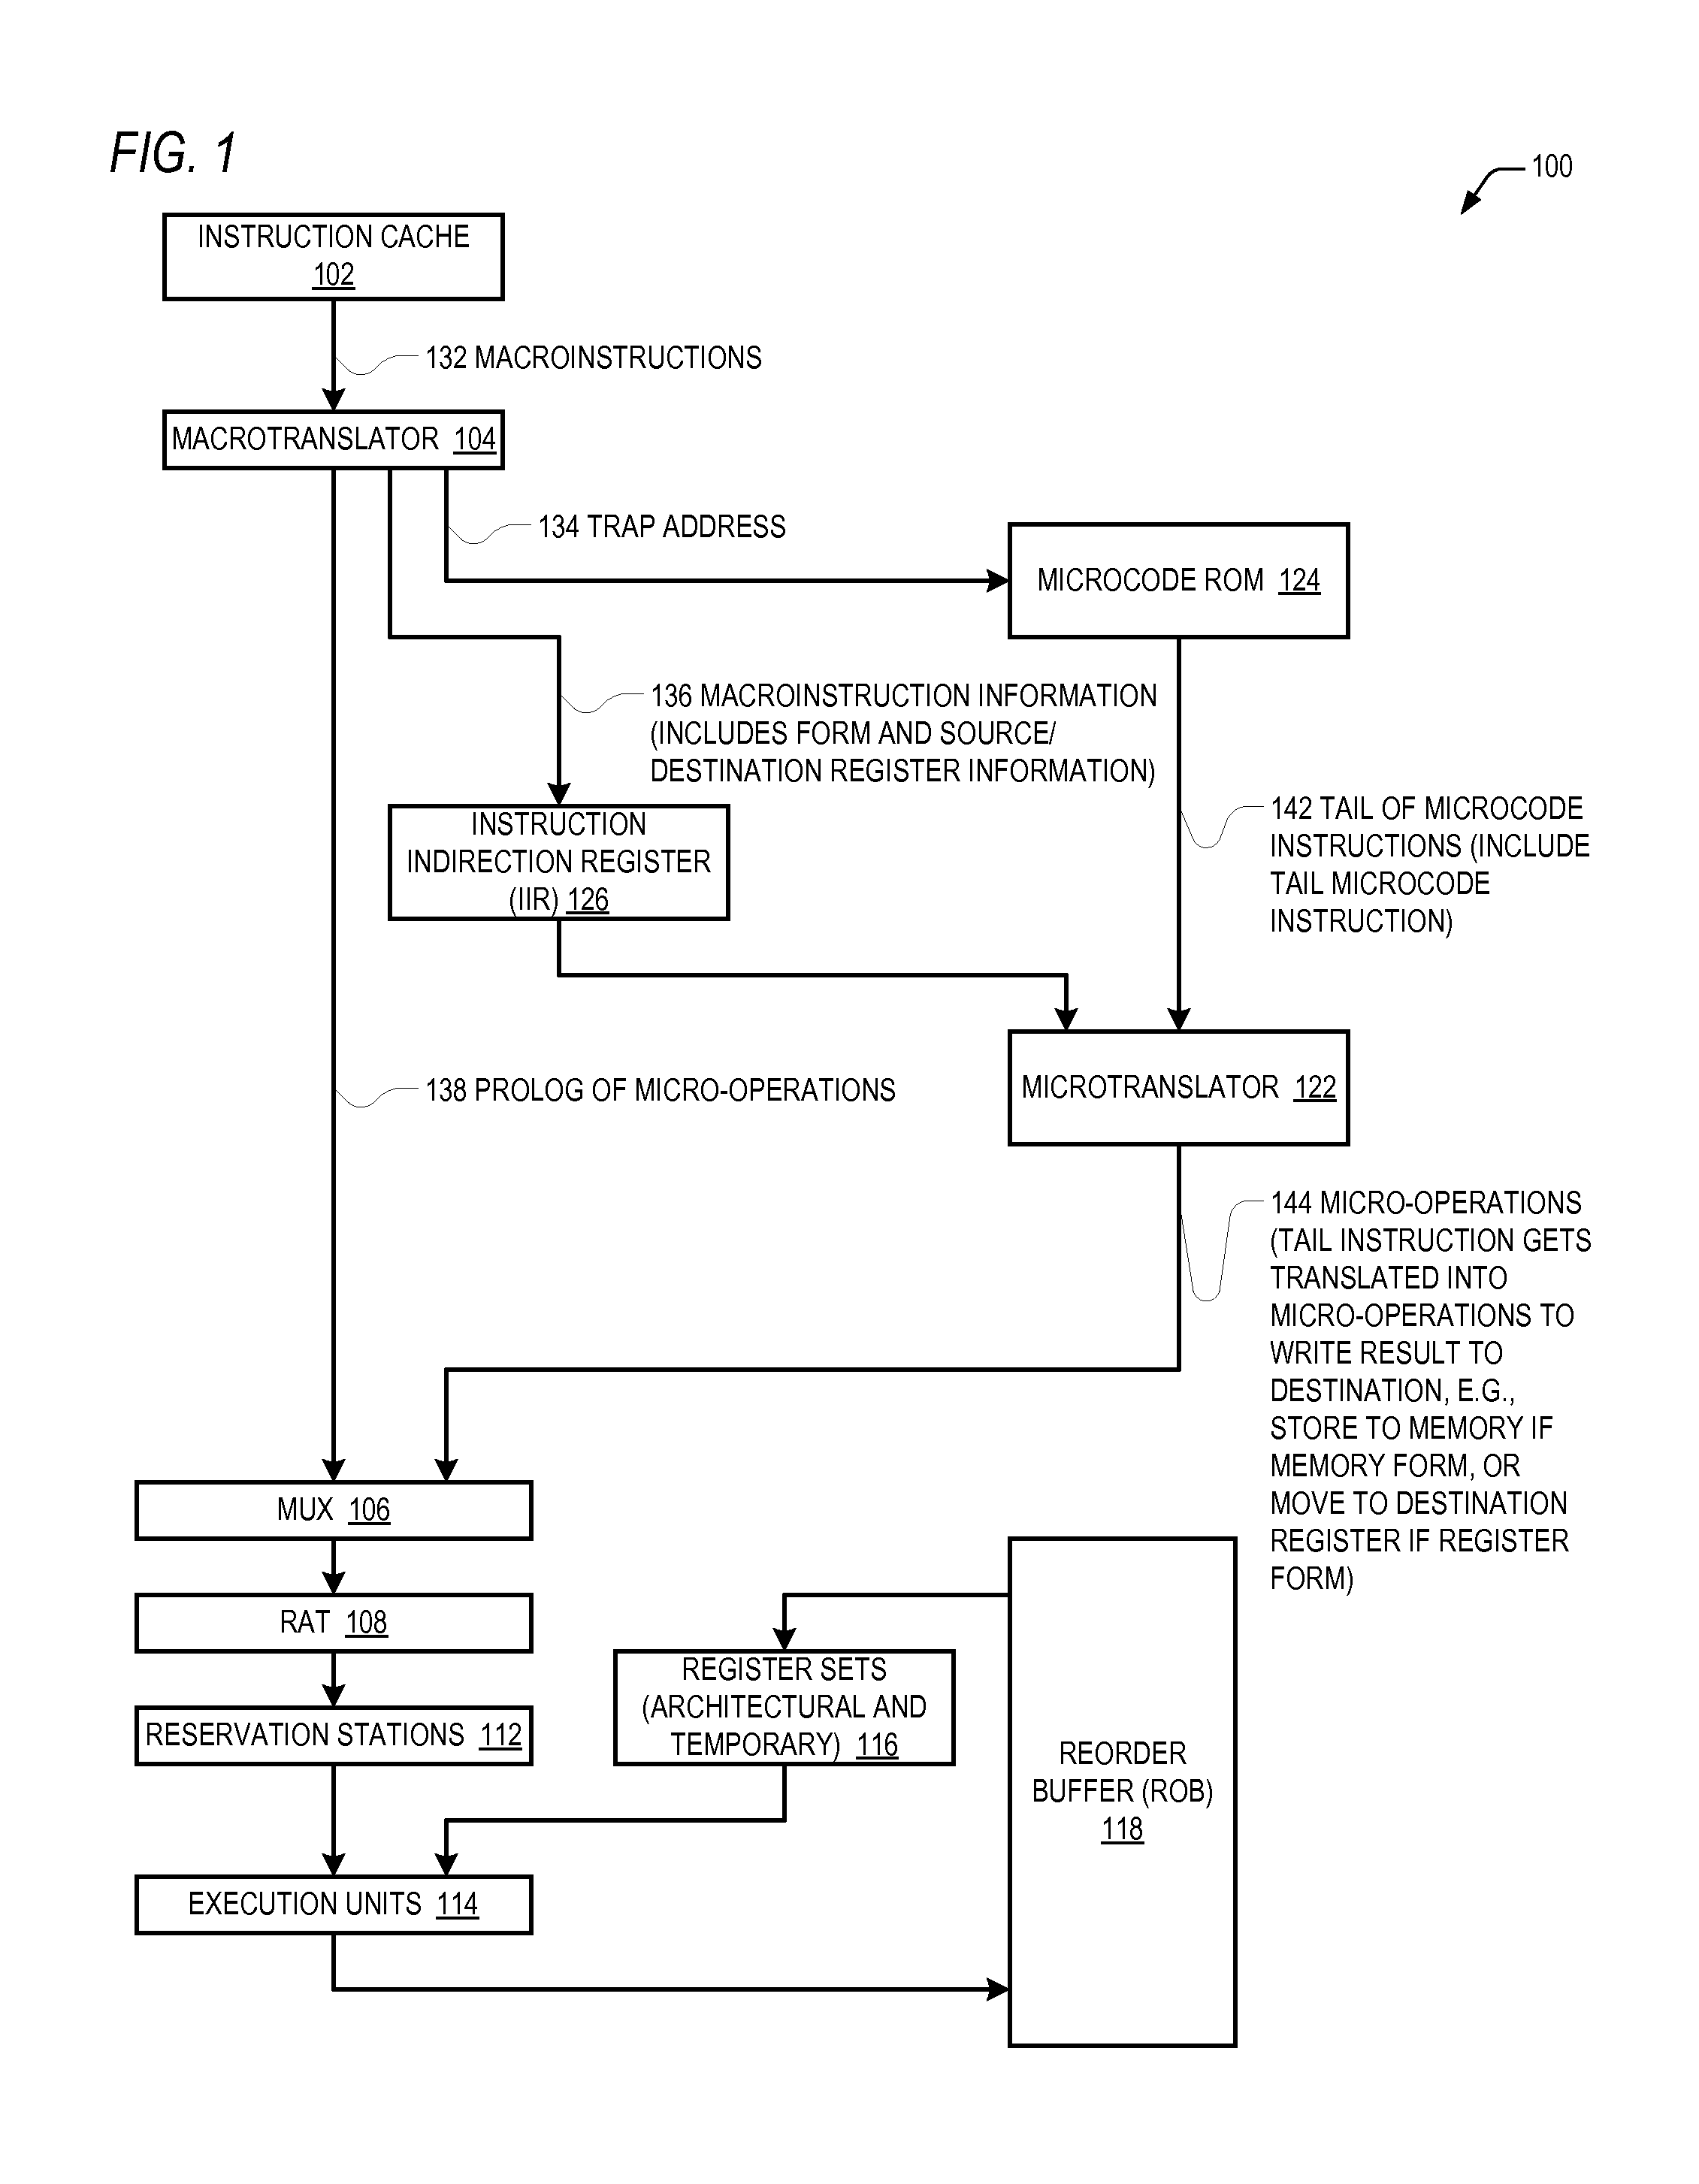 Microprocessor with microtranslator and tail microcode instruction for fast execution of complex macroinstructions having both memory and register forms